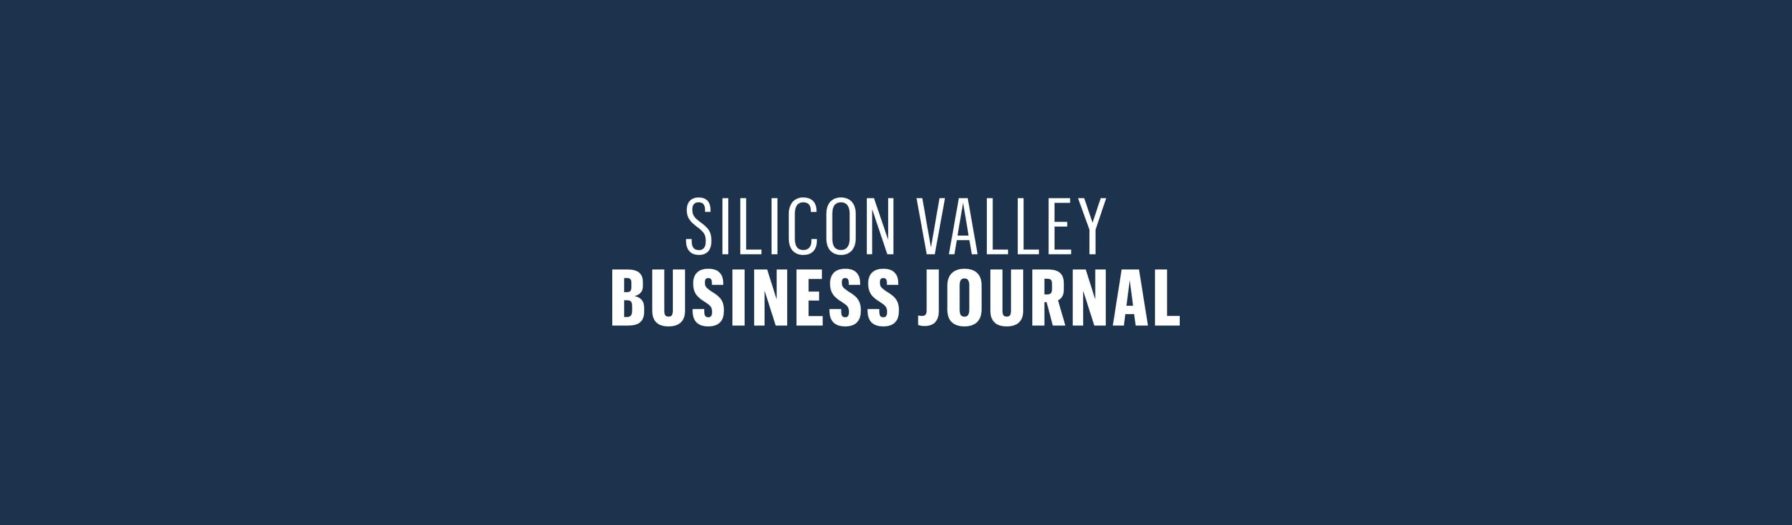  Silicon Valley Business Journal logo